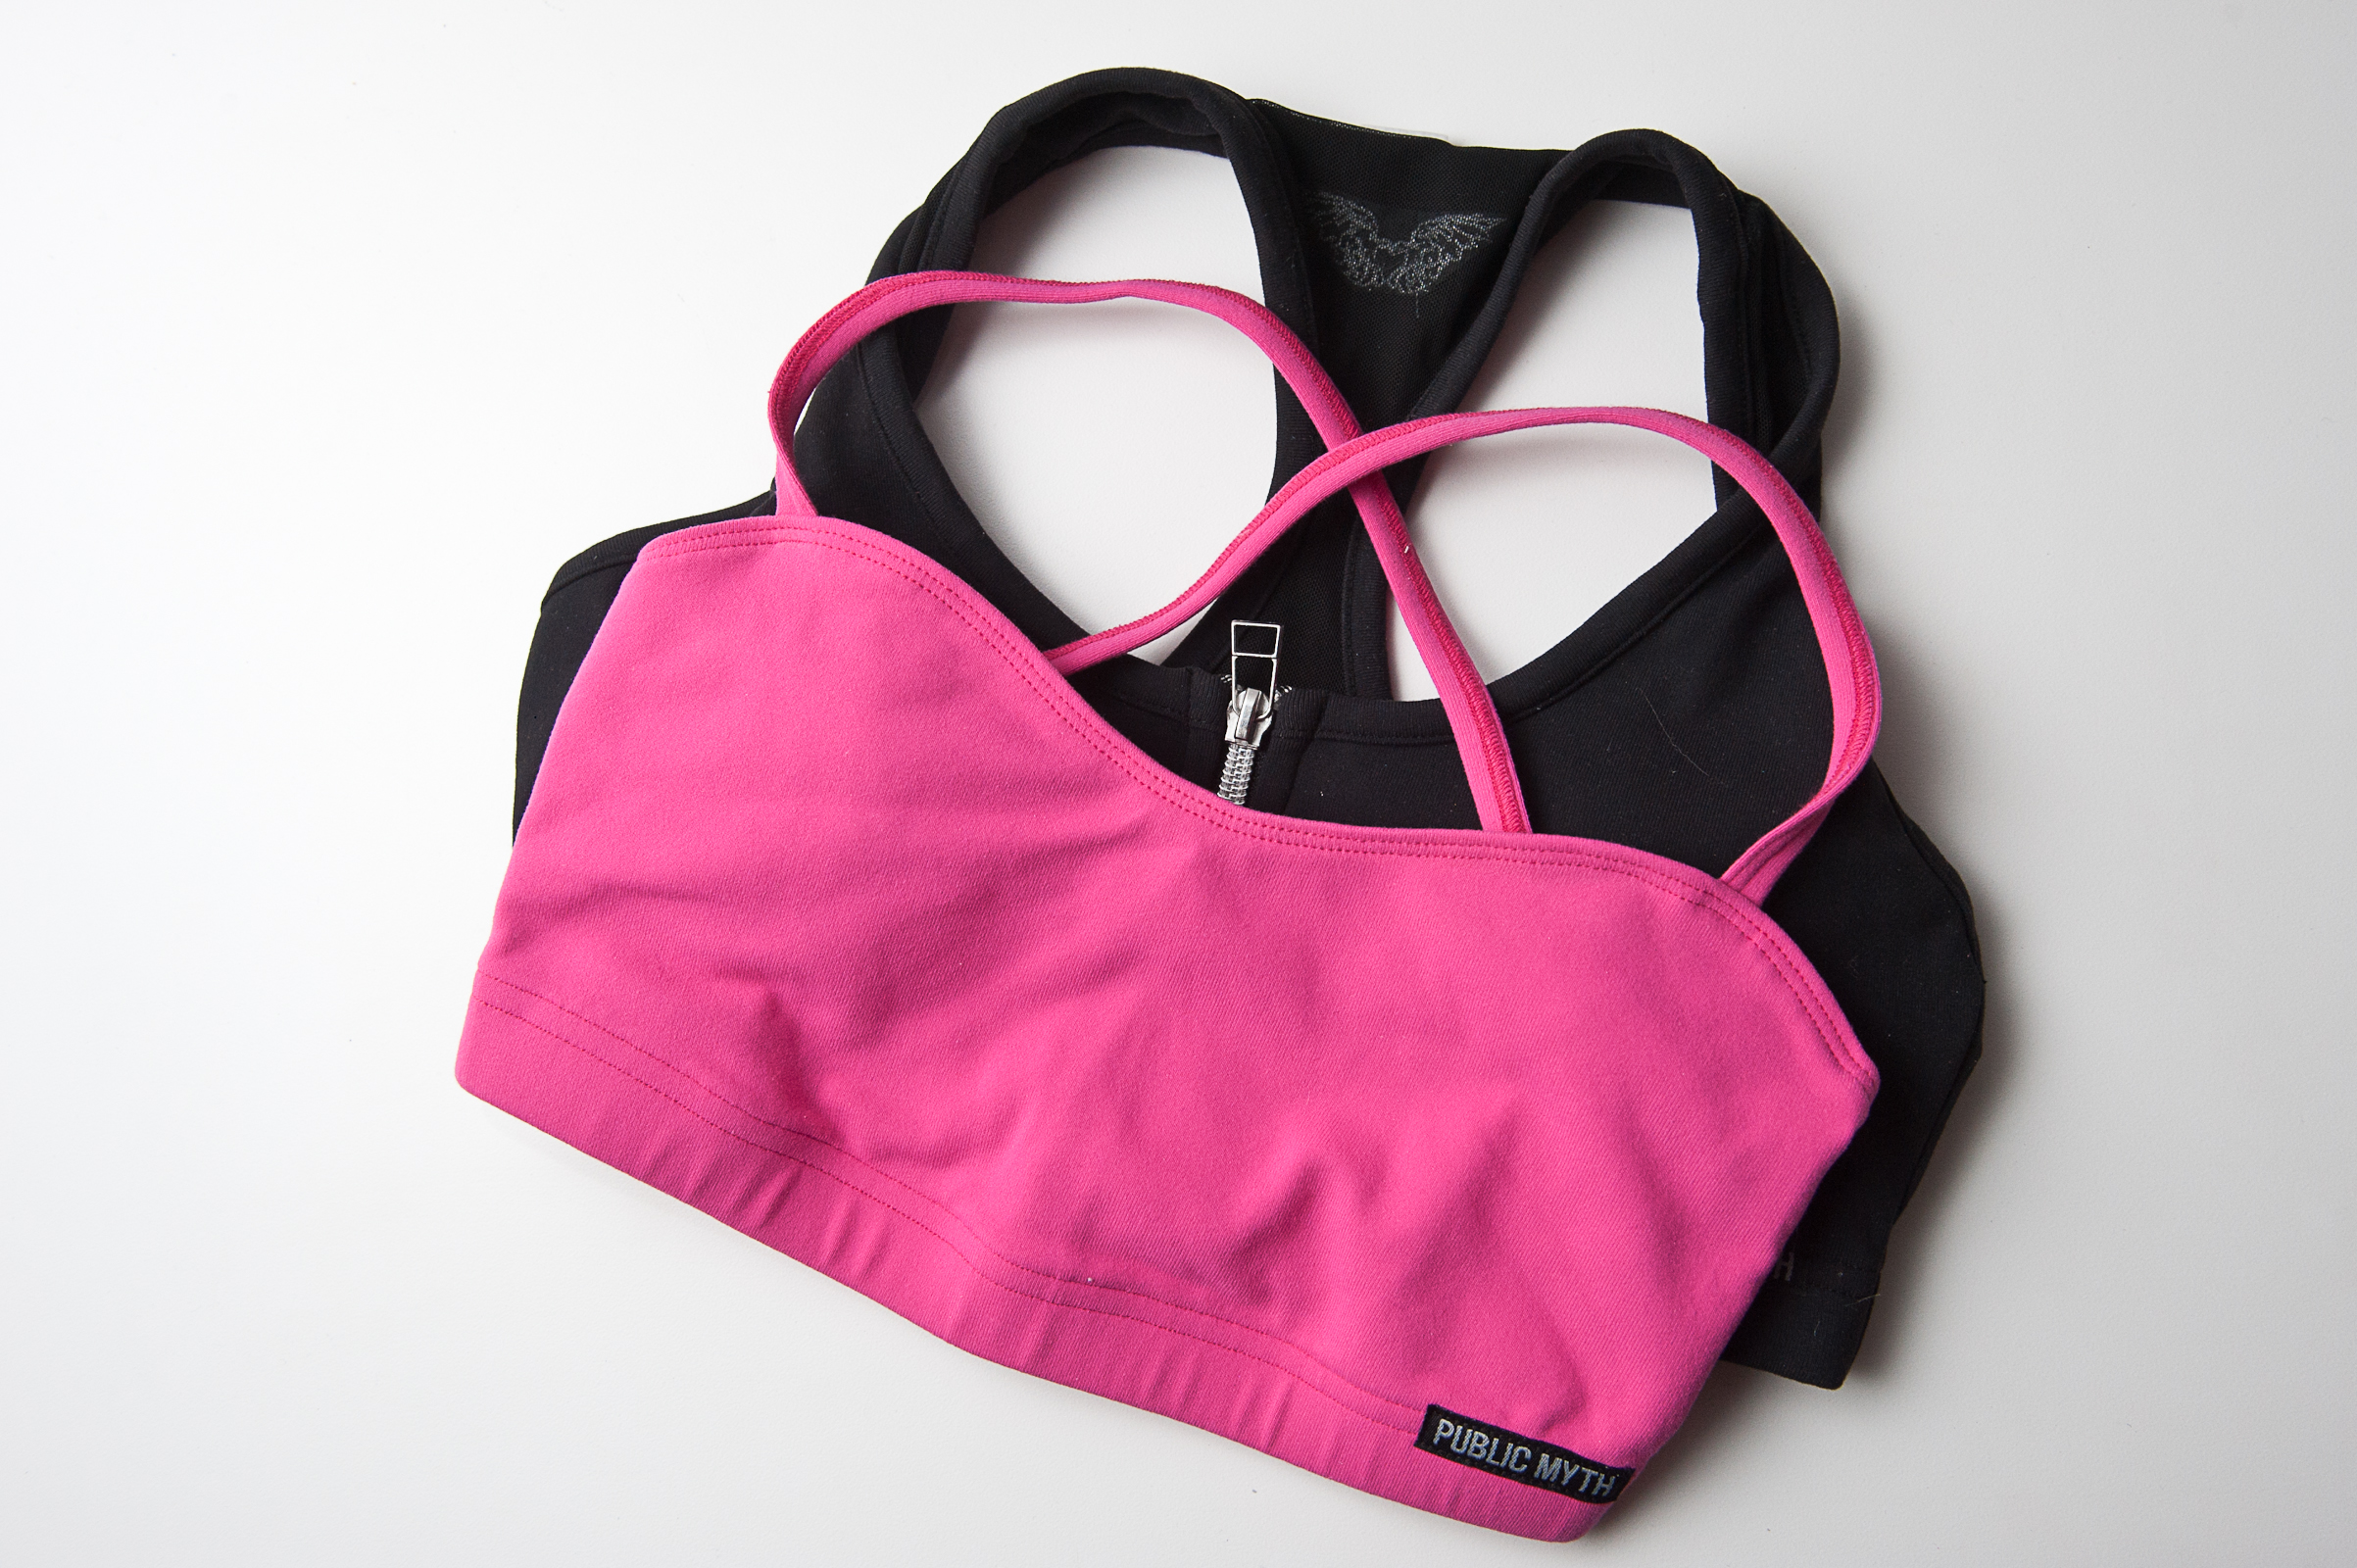 Which sports bra, for which activity? - Vancouver Is Awesome